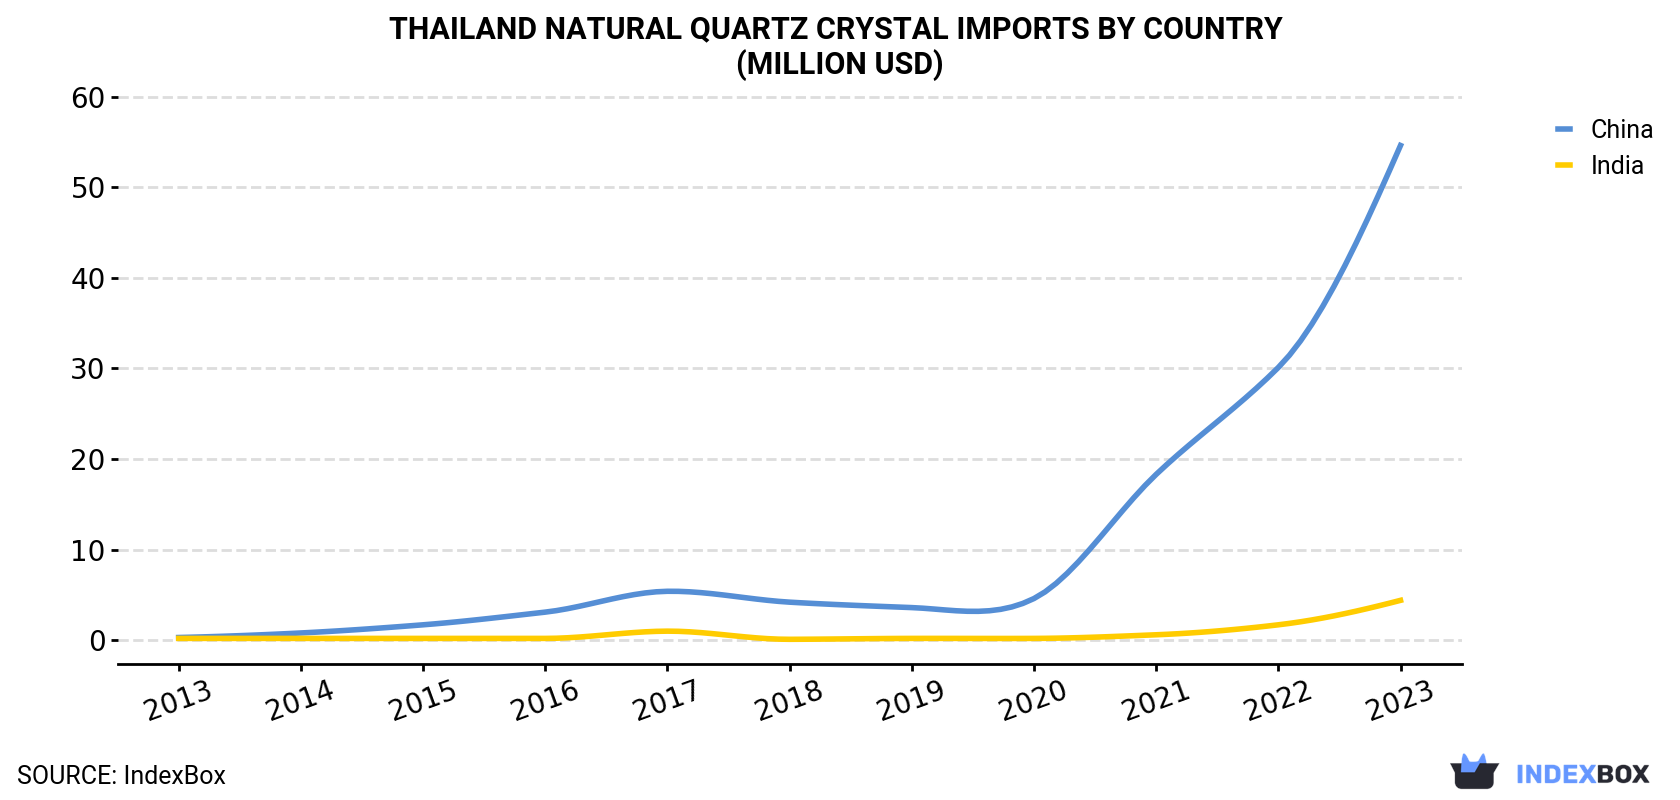 Thailand Natural Quartz Crystal Imports By Country (Million USD)